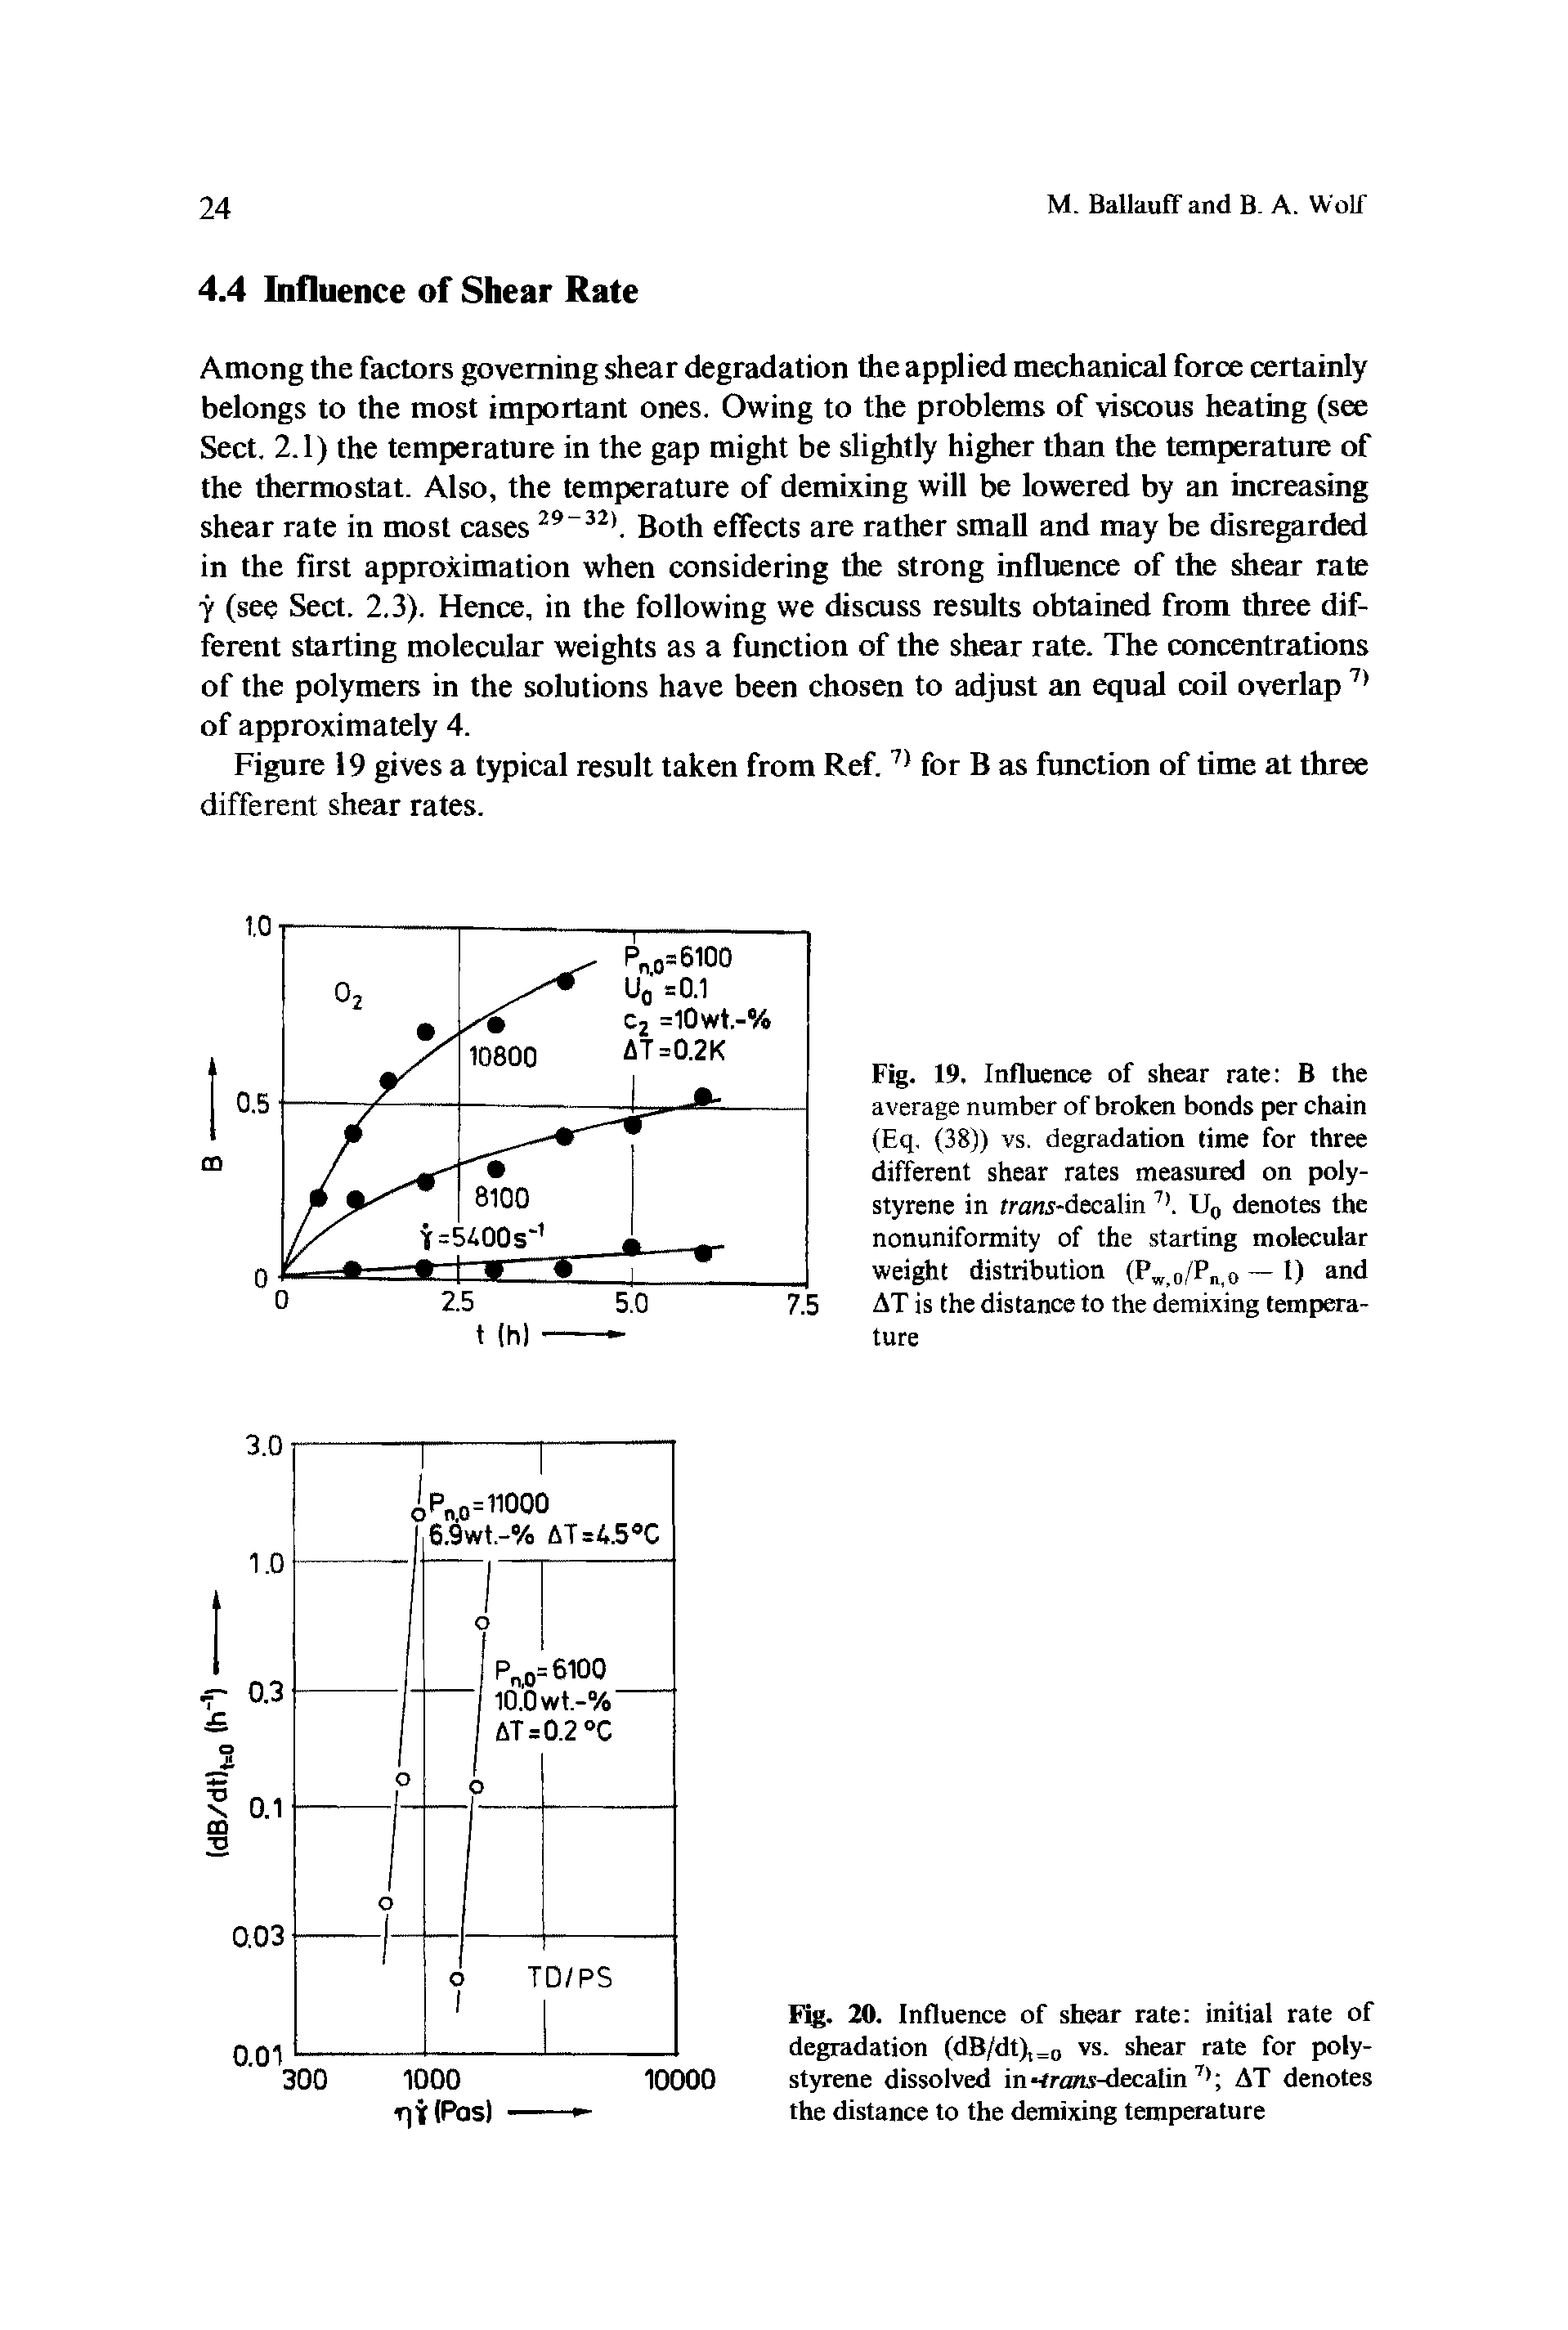 Fig. 20. Influence of shear rate initial rate of degradation (dB/dtX=o vs. shear rate for polystyrene dissolved in-trons-decalin AT denotes the distance to the demixing temperature...